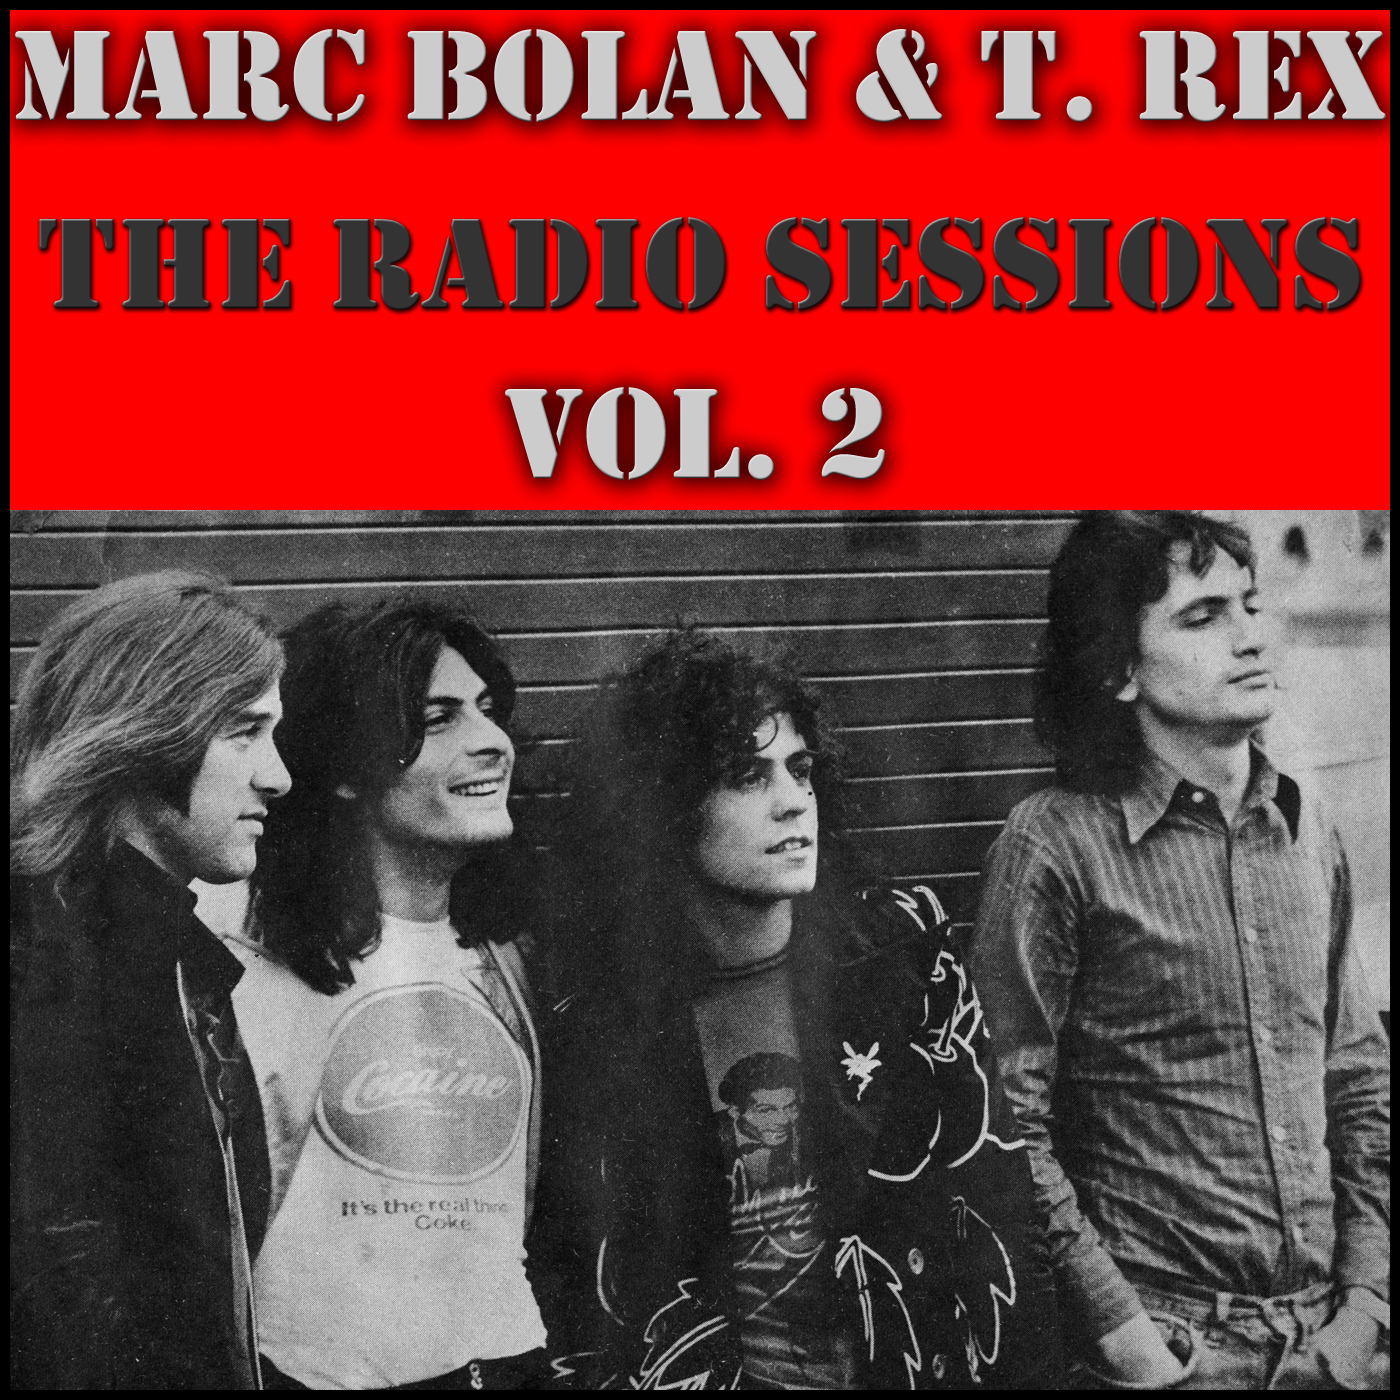 Marc Bolan & T. Rex- The Radio Sessions Vol. 2 (Live)